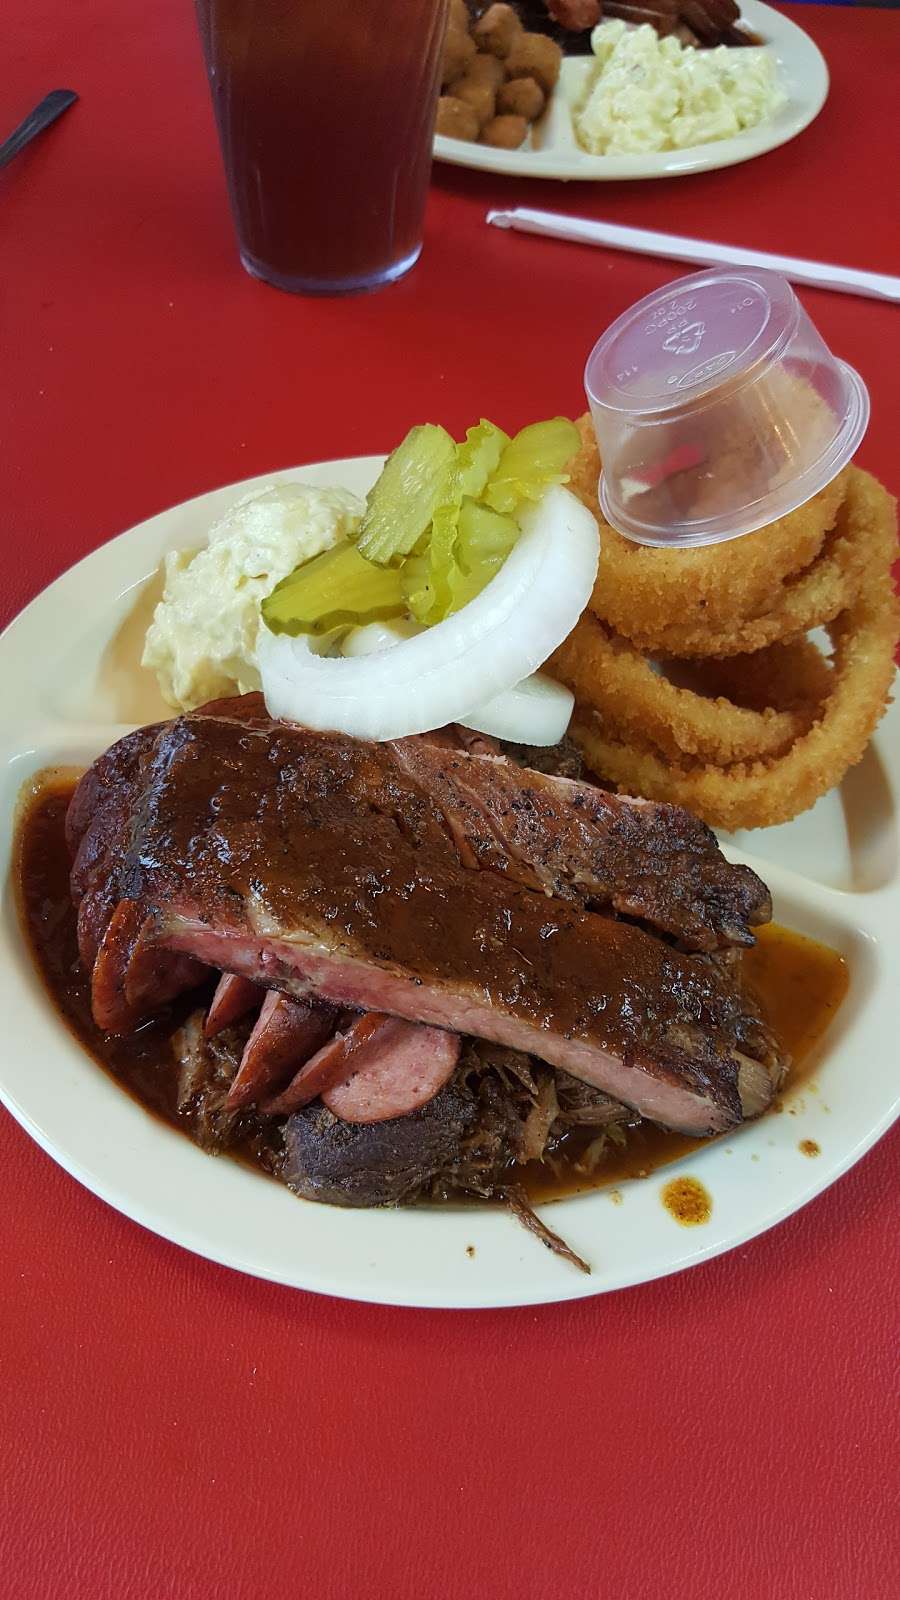 Brothers-In-Laws Bar-B-Que | 503 Freeport St, Houston, TX 77015 | Phone: (713) 453-2676